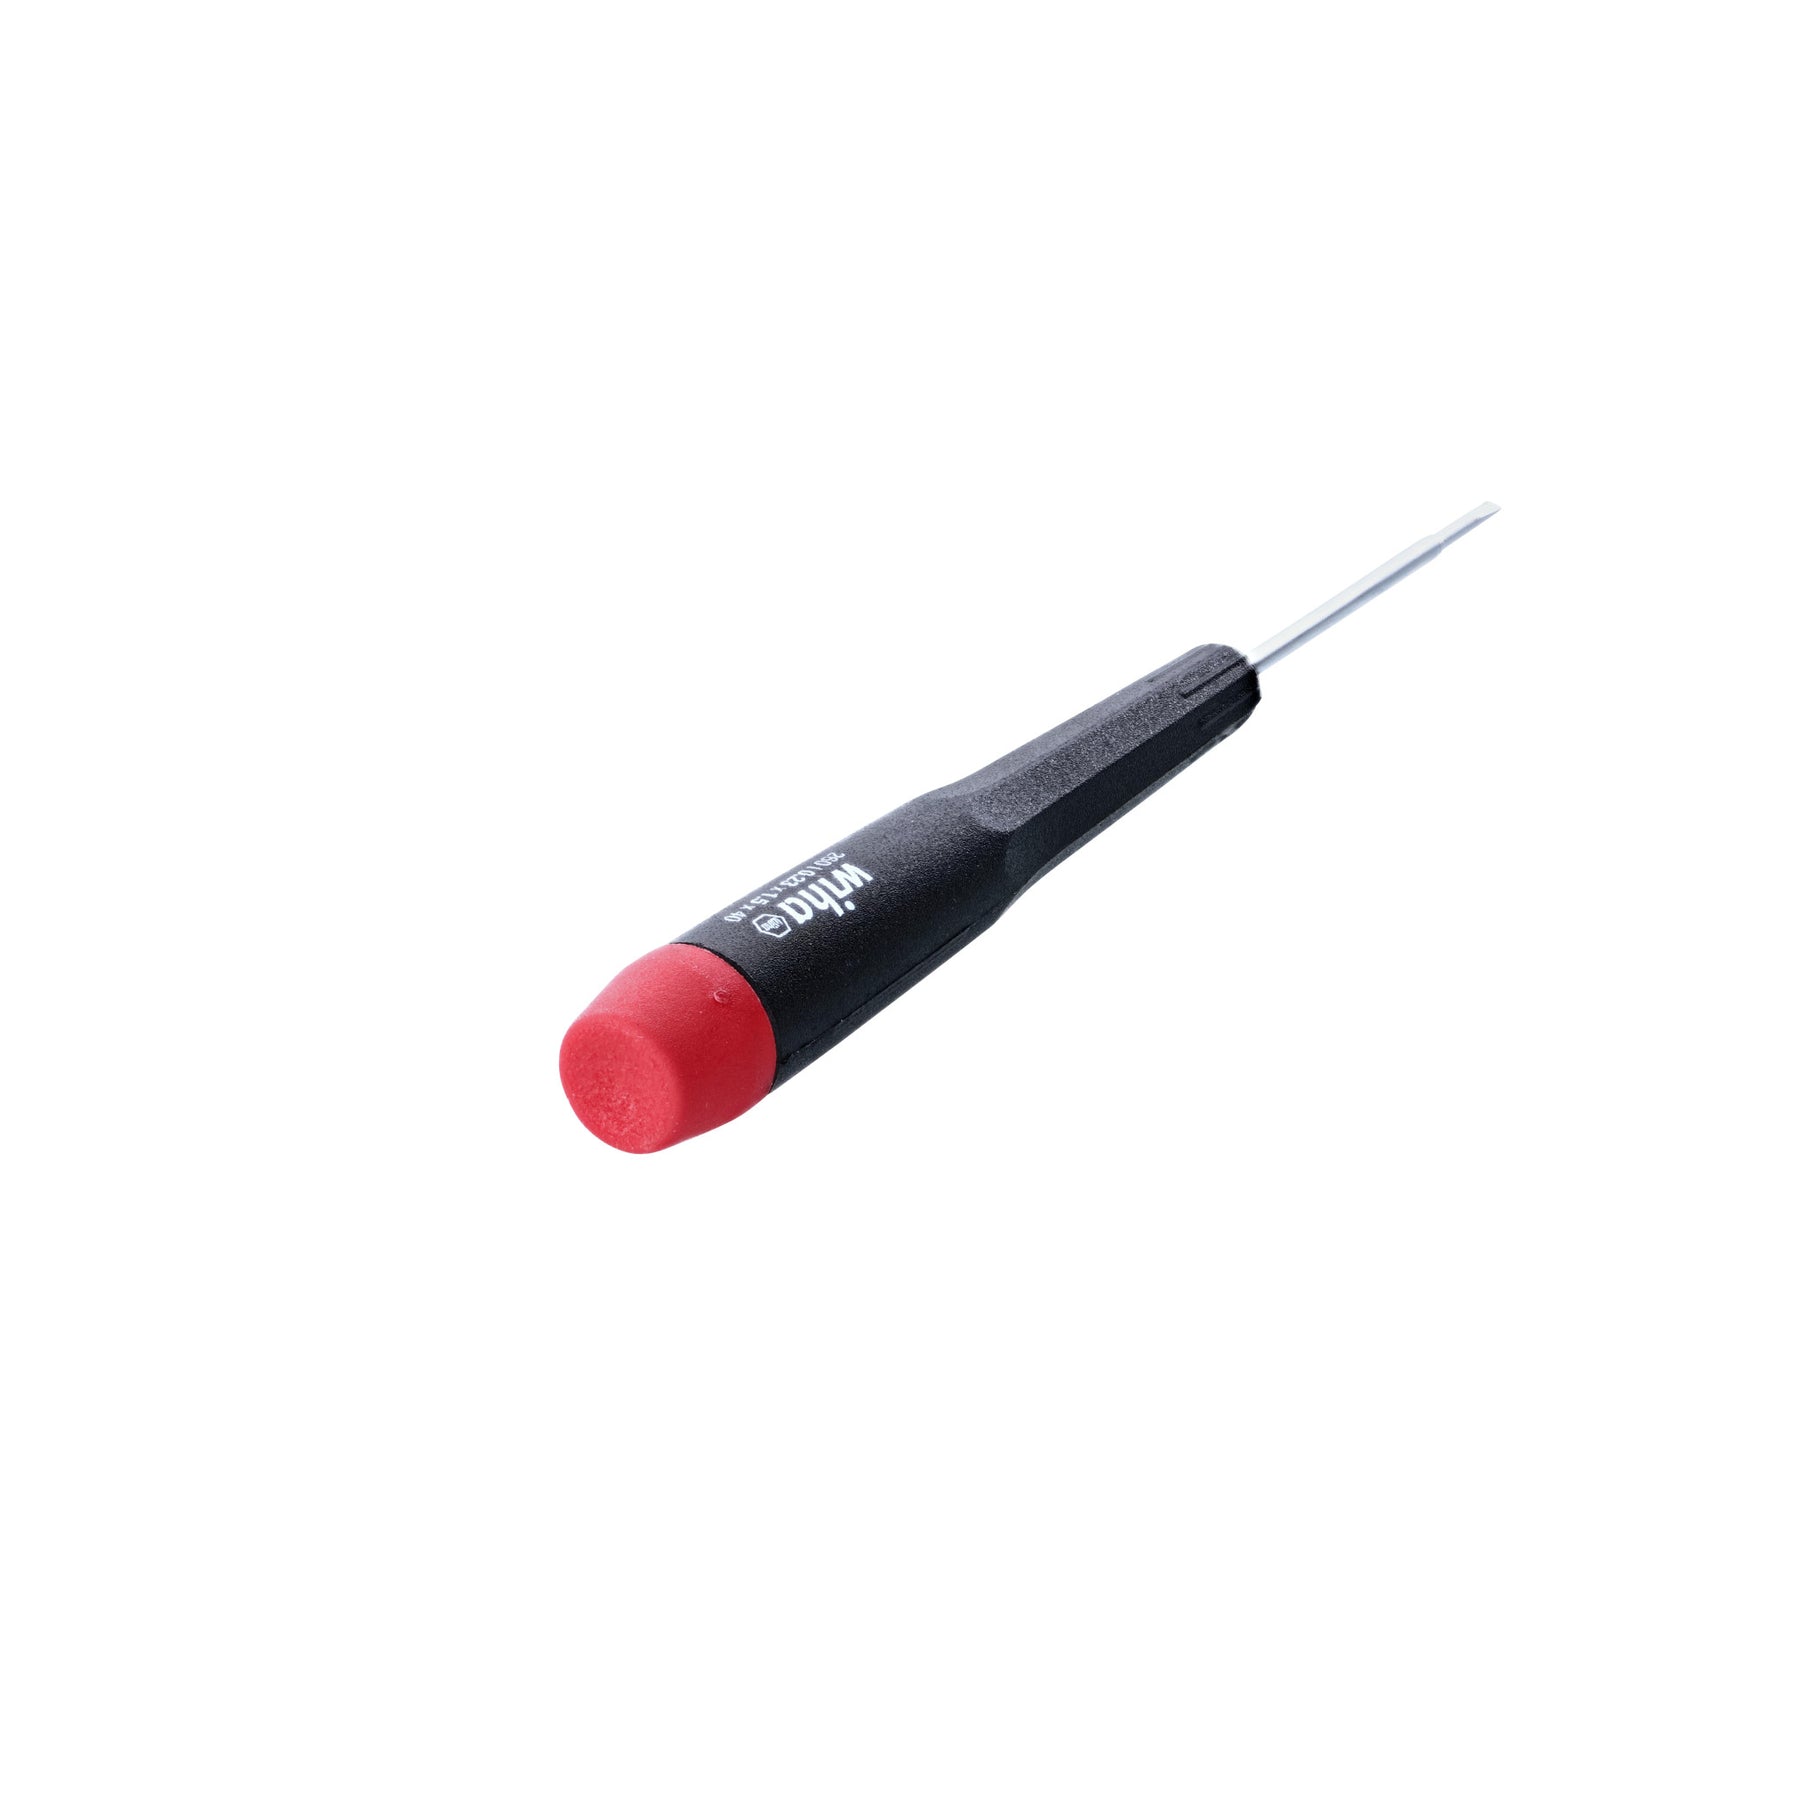 Precision Slotted Screwdriver 1.5mm x 40mm